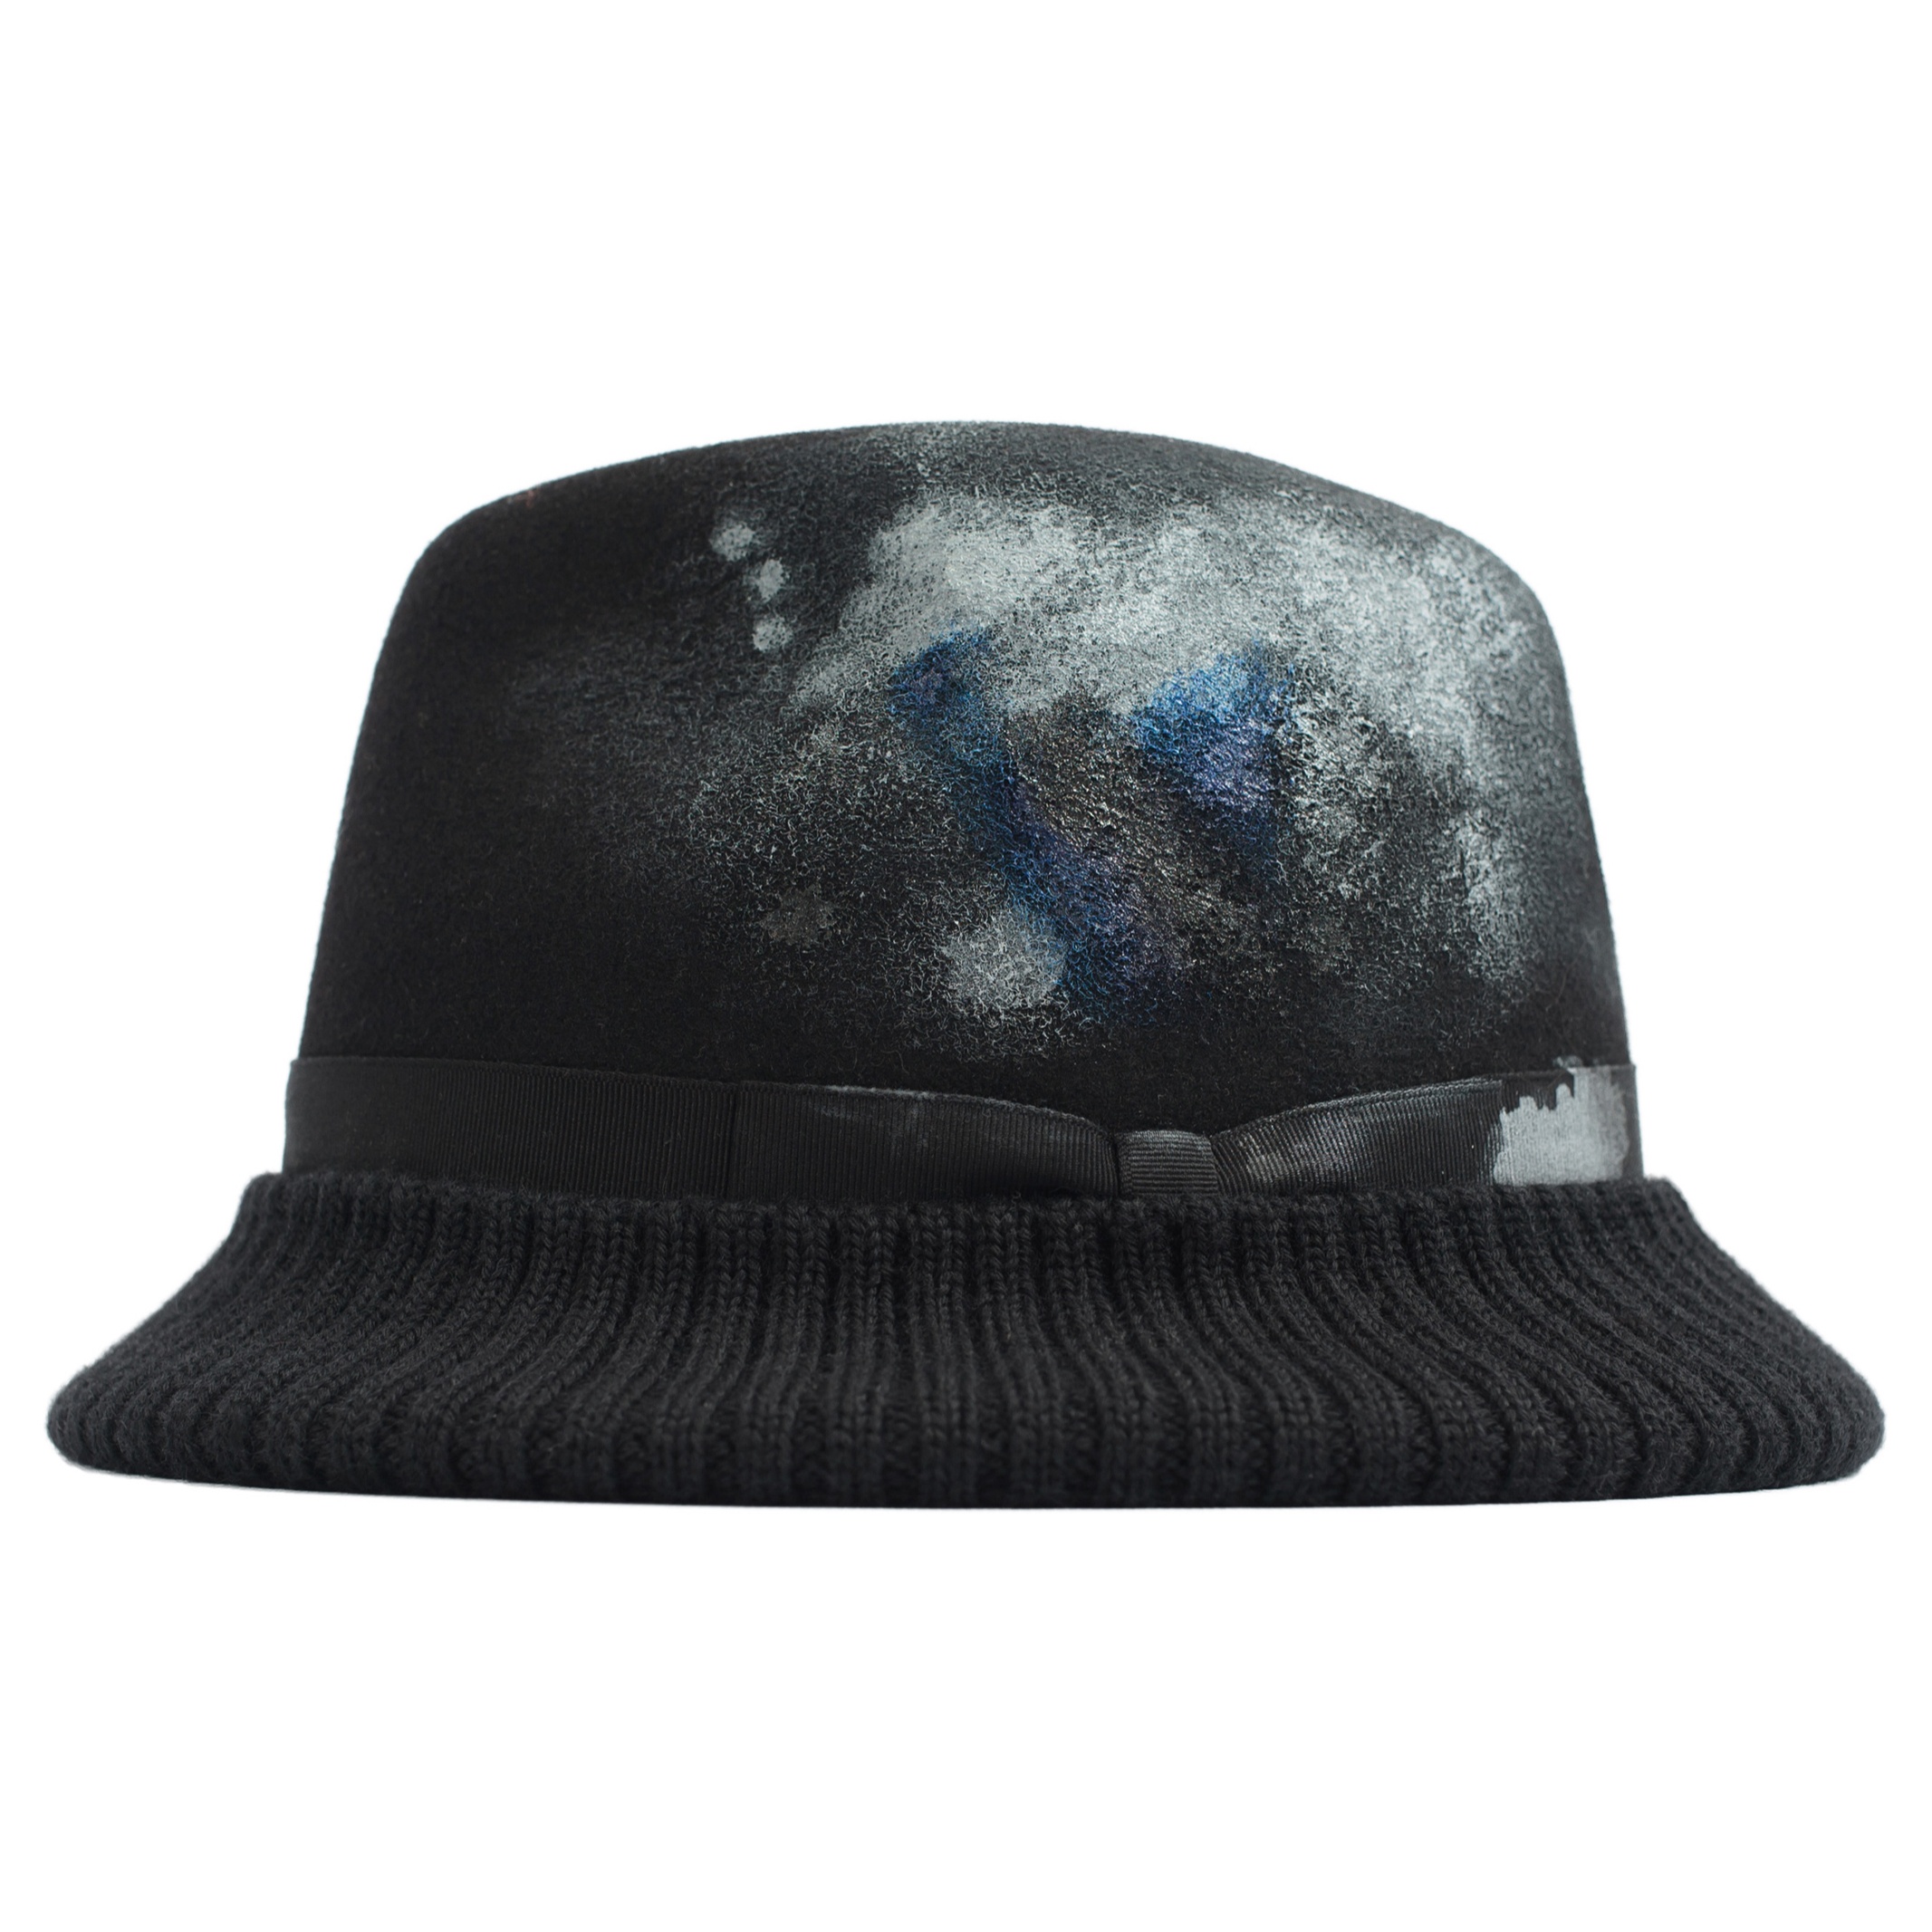 BLACK HAT WITH PAINT MARKS - 2